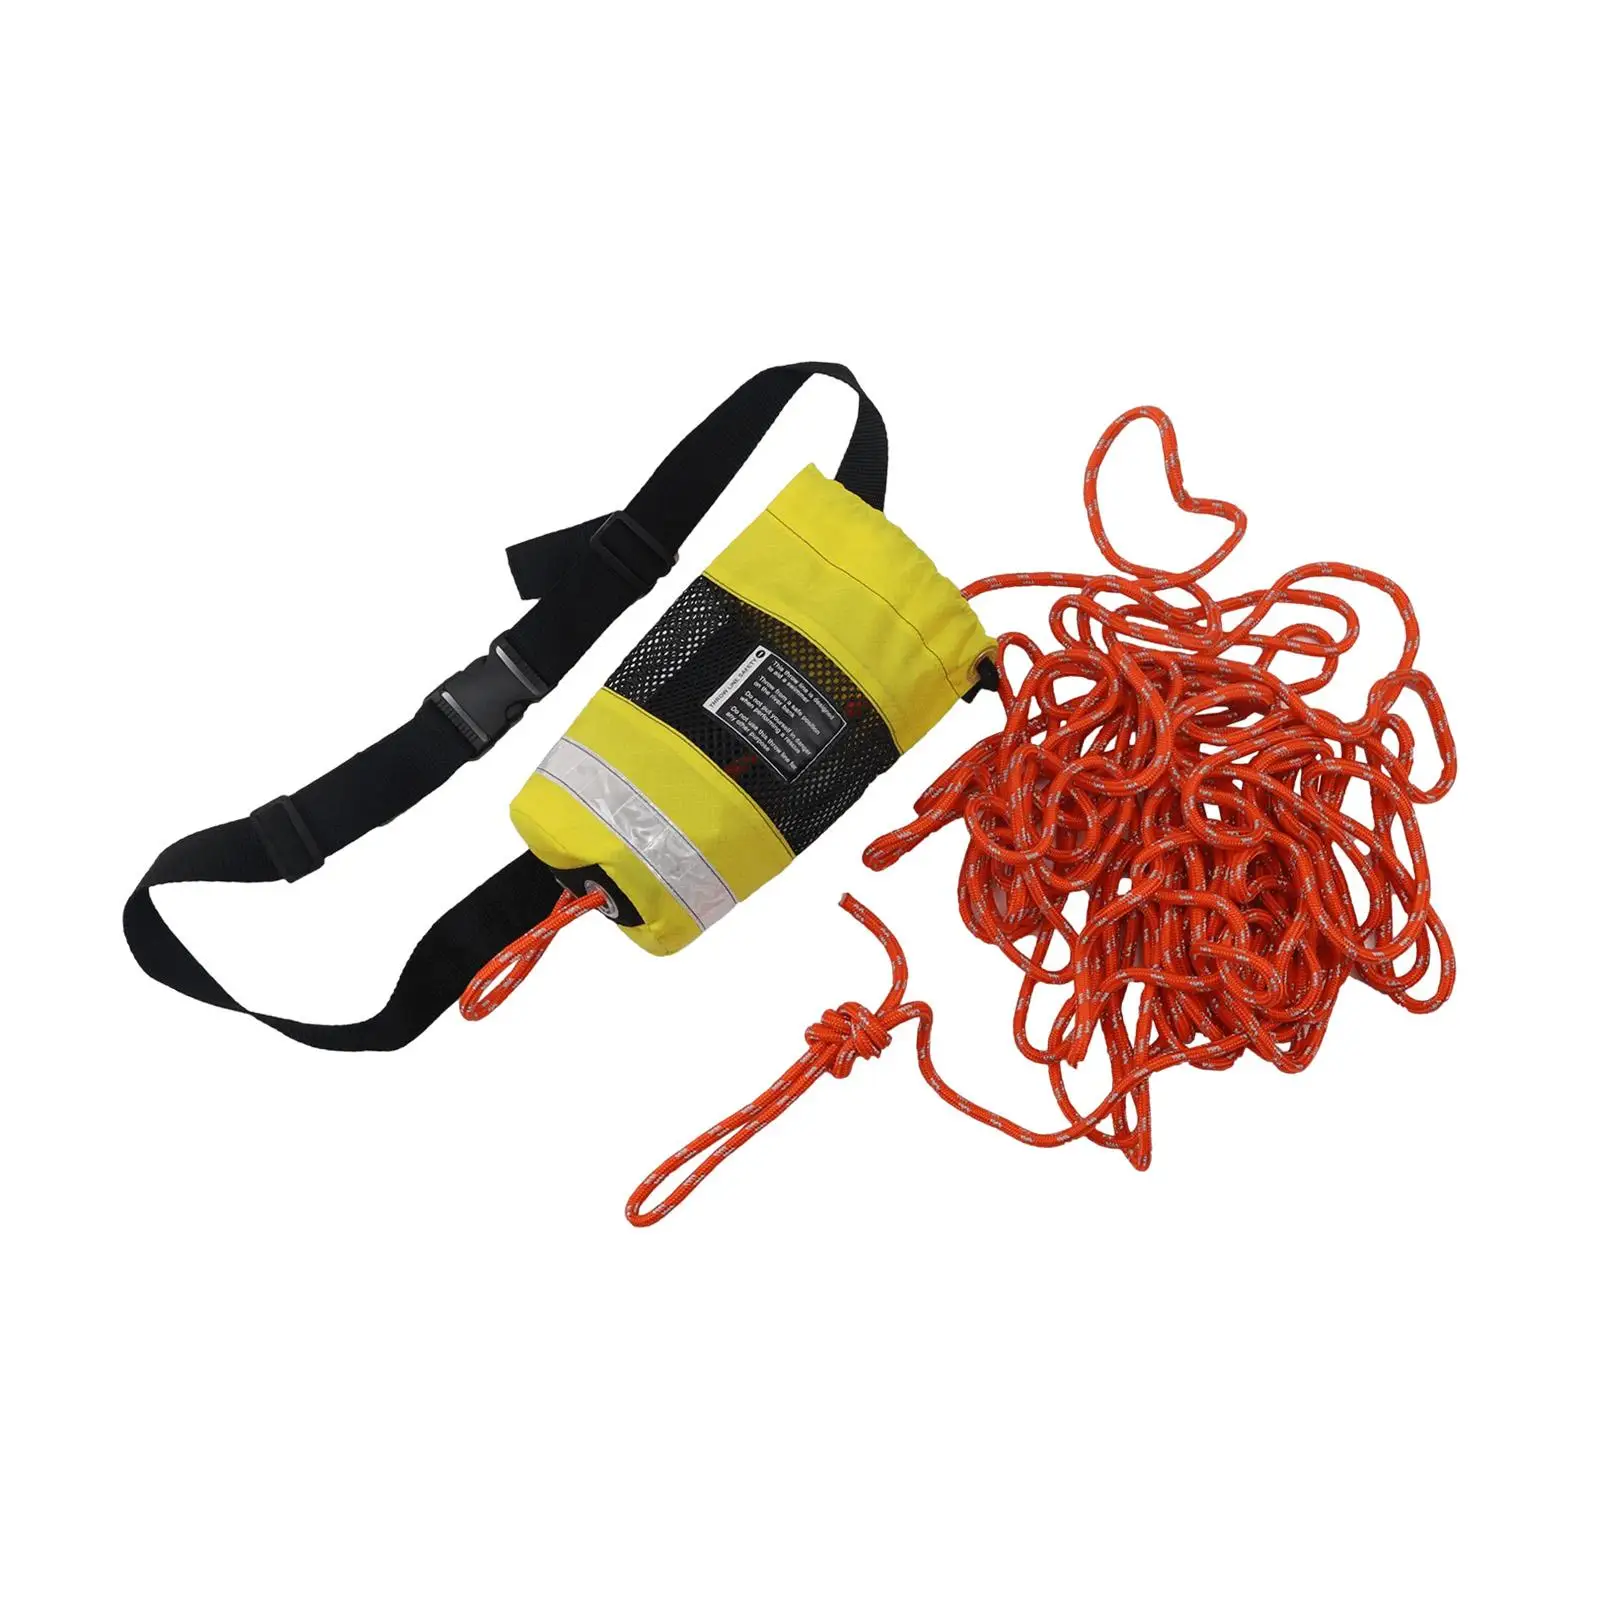 Portable Rope Throw Bag High Visibility Floating Throwing Line 21M for Swimming, Canoe Ice Fishing, Buoyant Dinghy, Accessories